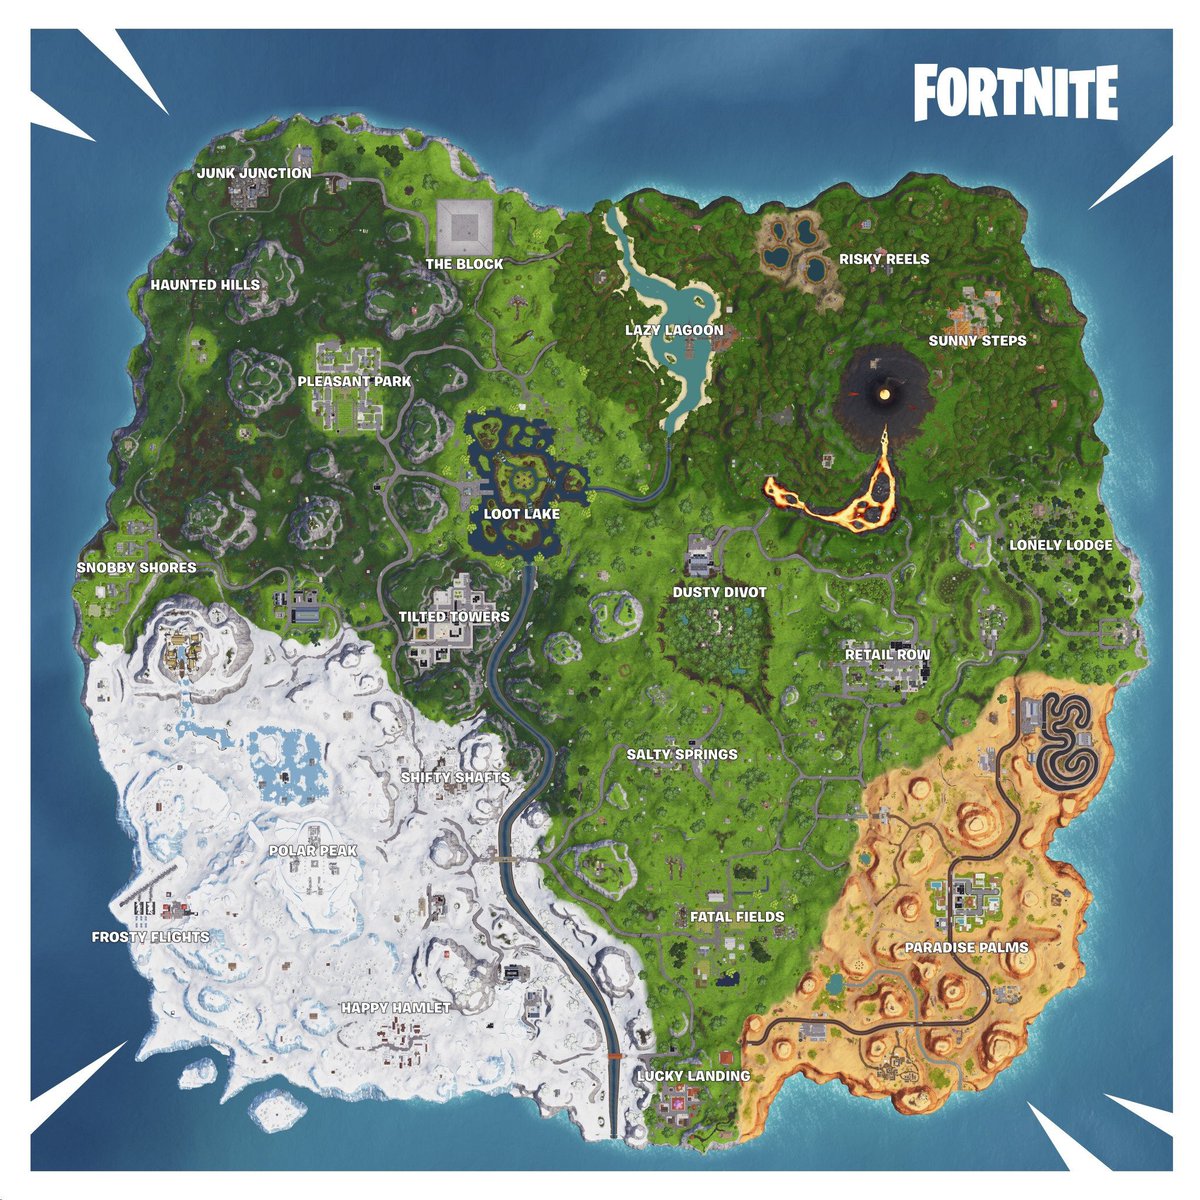 Fortnite Season 8 Map Battle Pass Patch Notes Skins And More - season 8 map